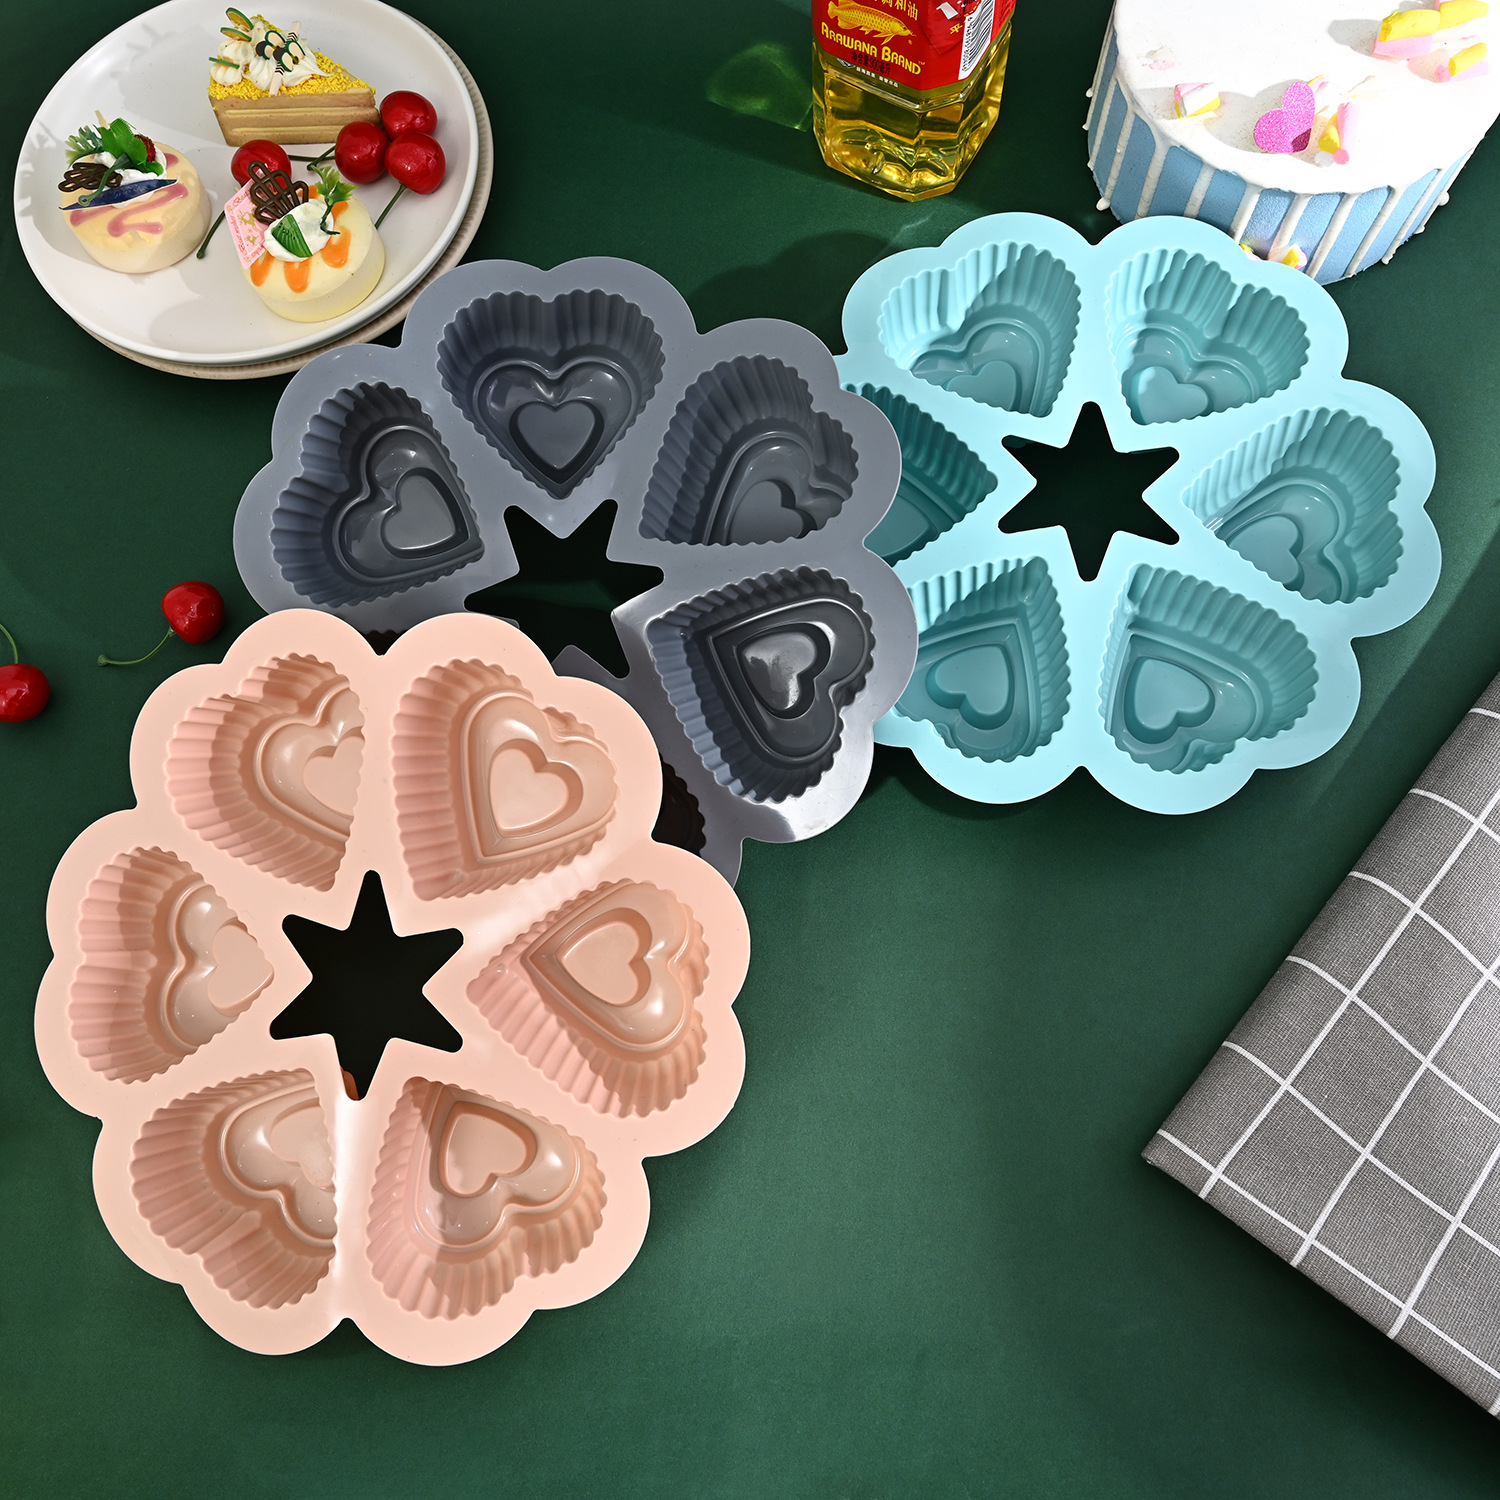 Factory Direct Sales 6-Piece Heart-Shaped Edible Silicon Cake Mold Western Dessert Macaron Household Kitchen Baking Tray